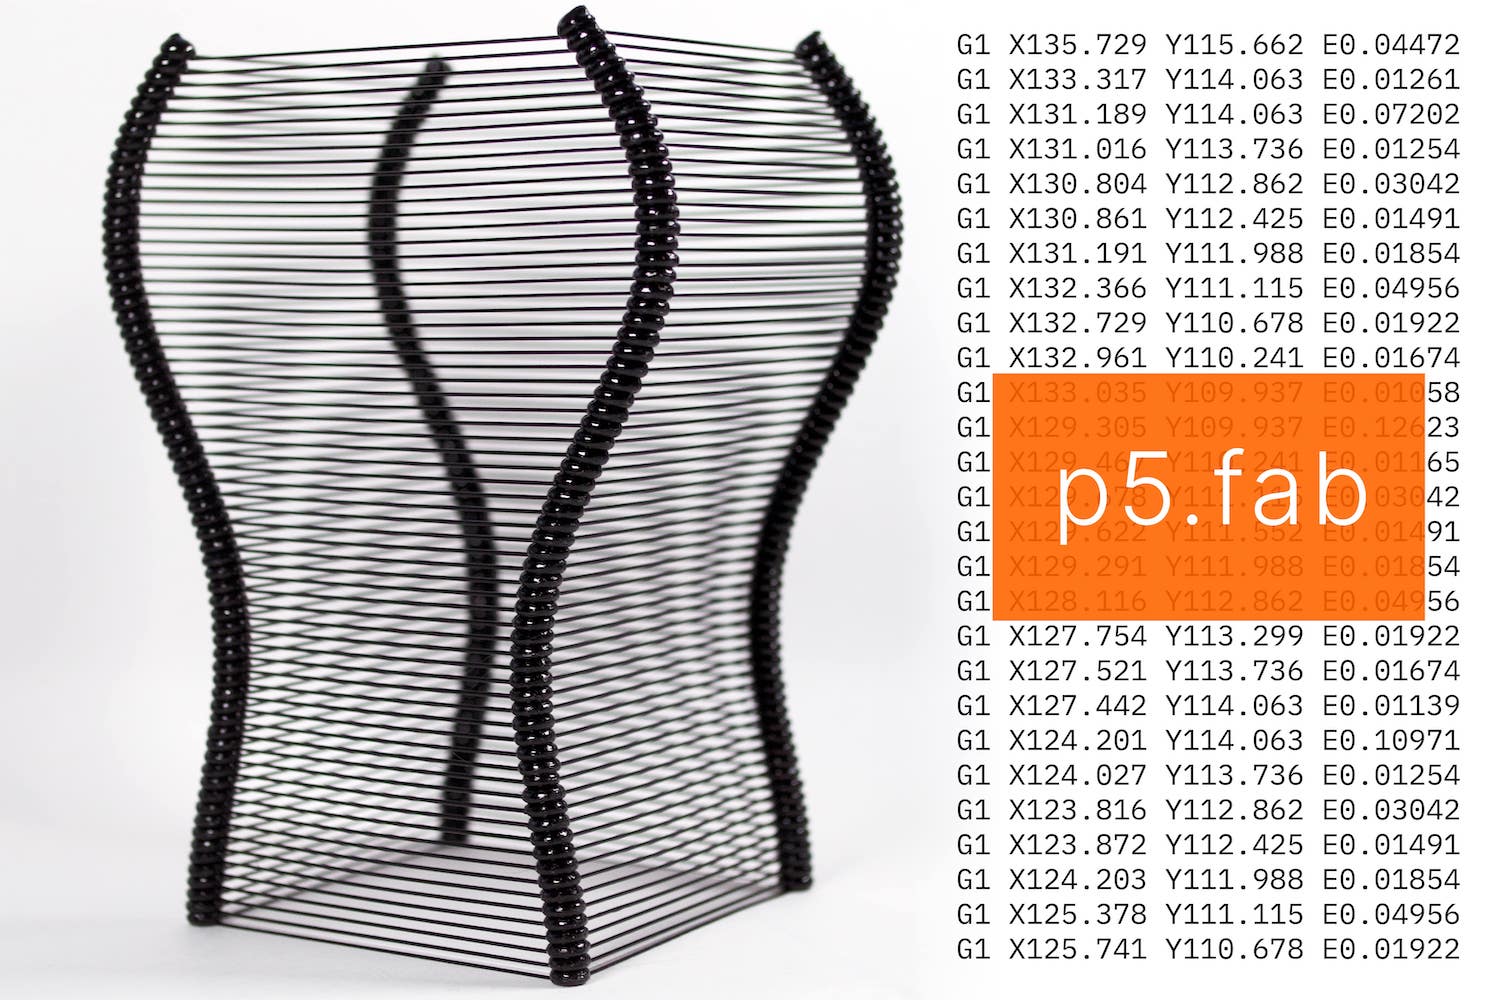 An image of 3D printed vase made with p5.fab, next to lines of G-Code overlayed with the title 'p5.fab'.